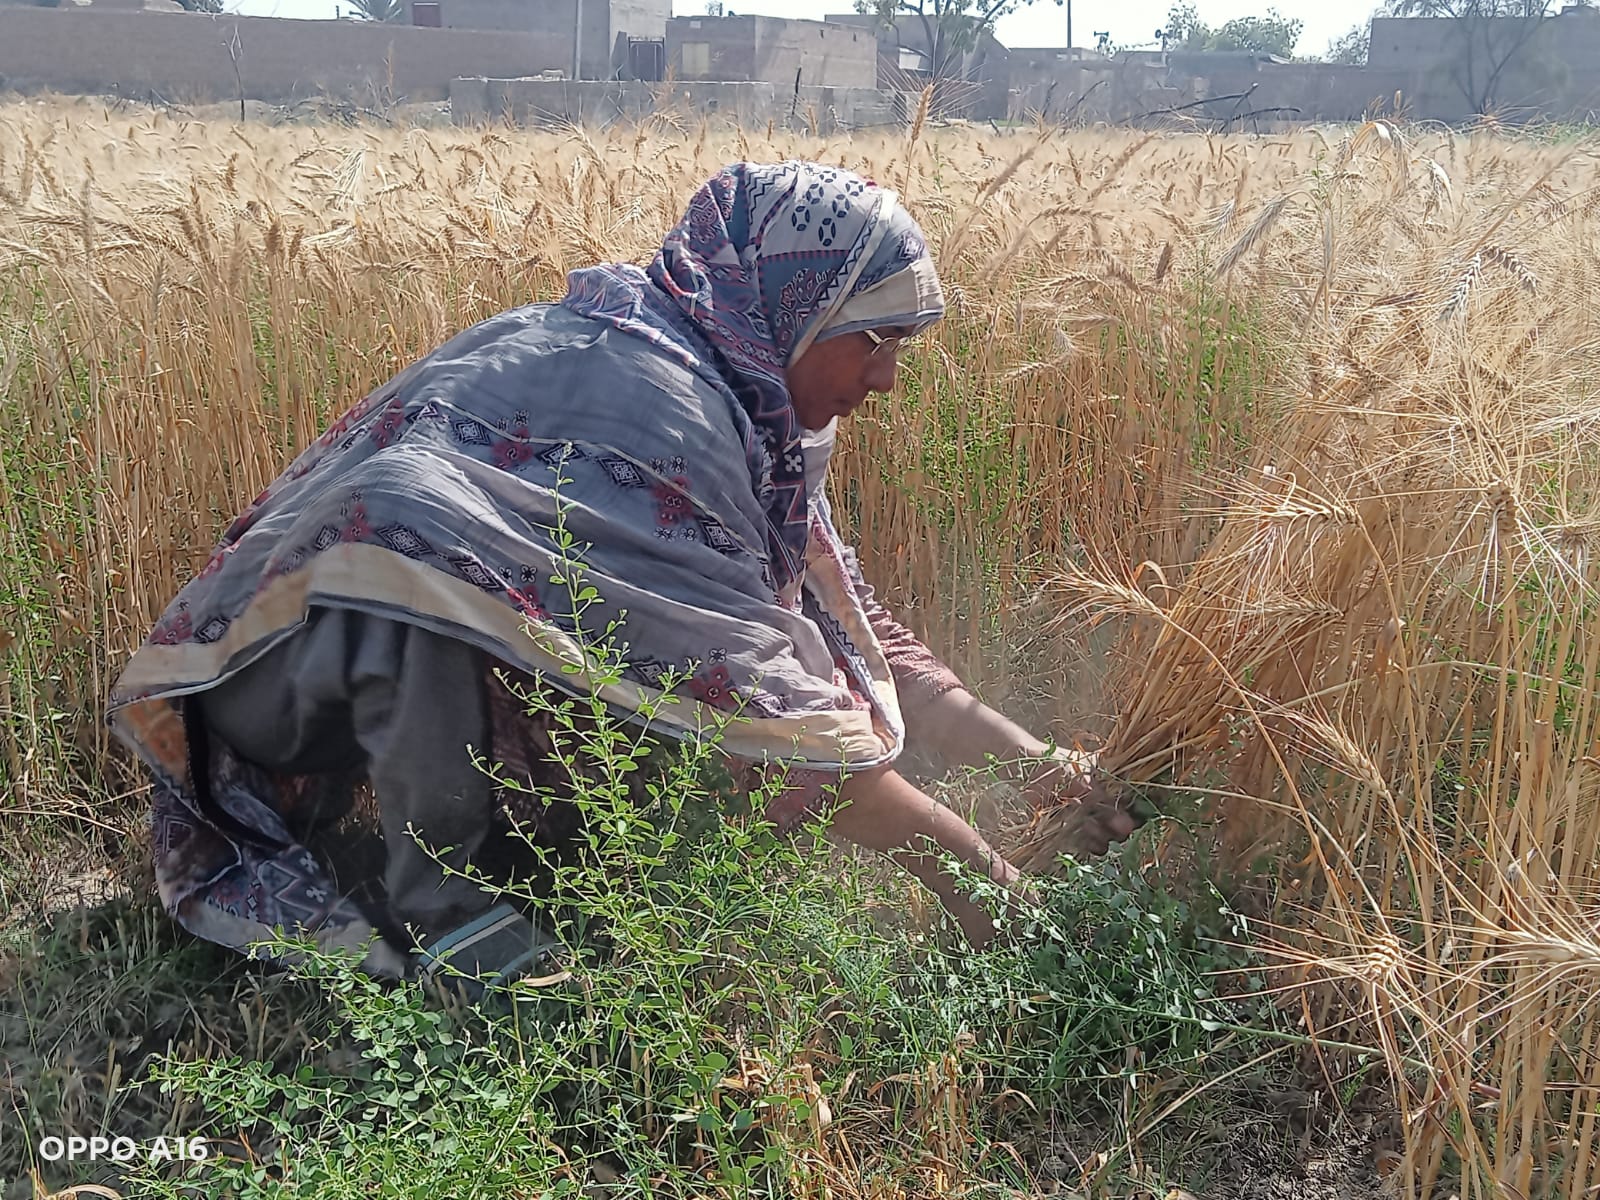 A women crouches in a field of wheat. She appears to be harvesting the plants.